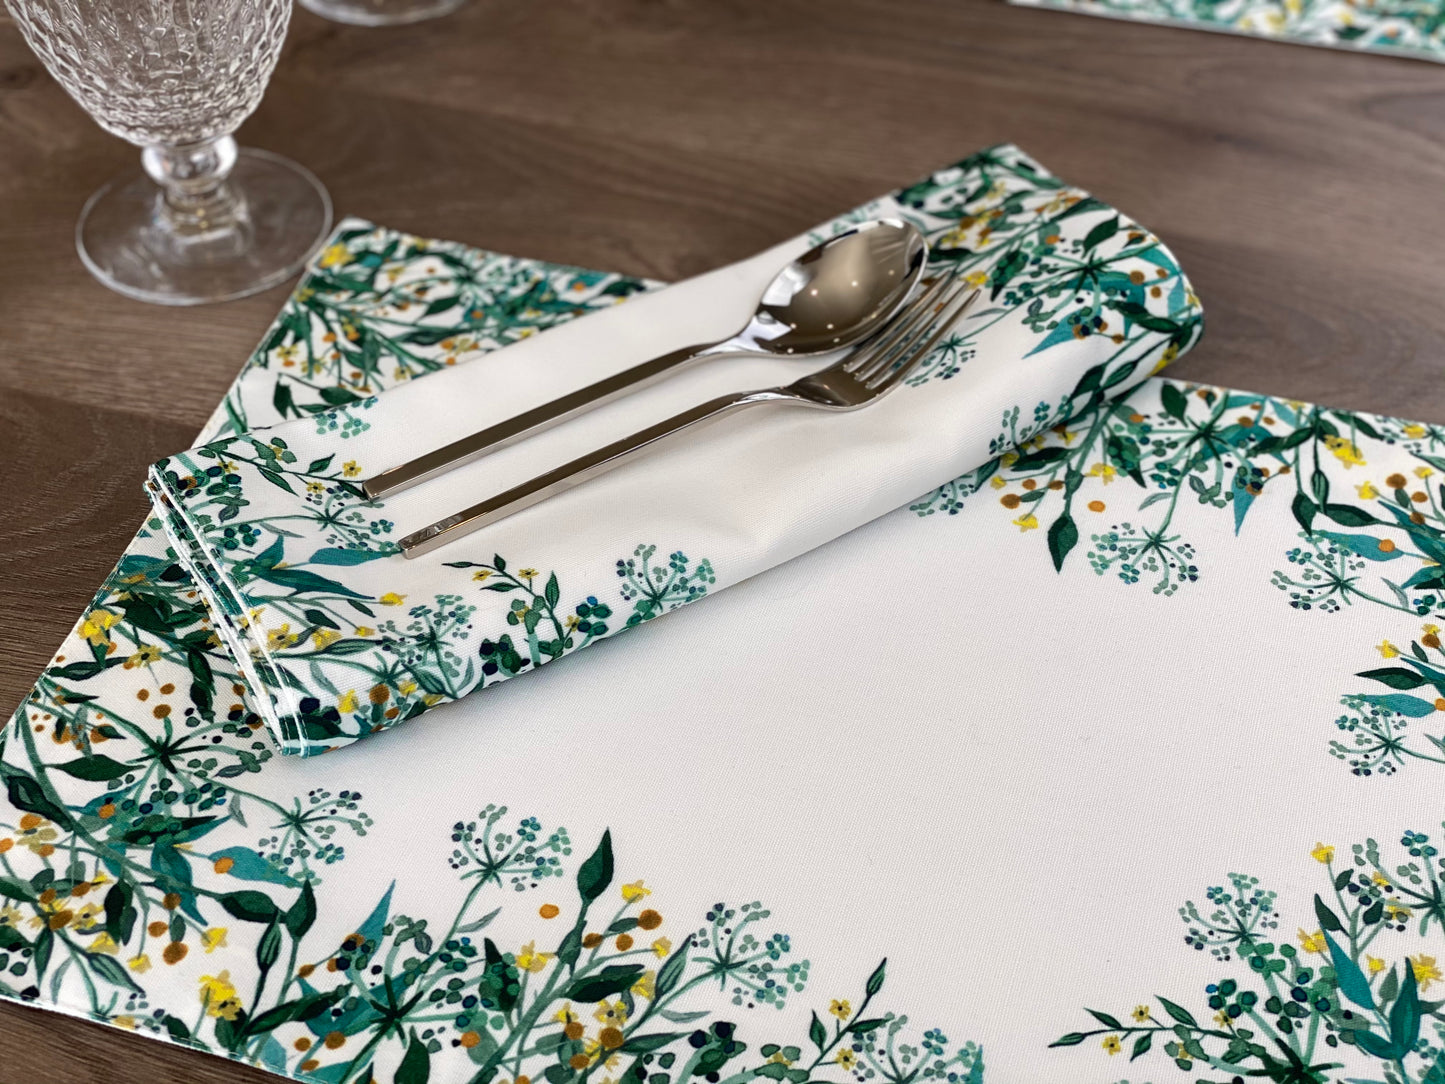 Set of 4 Green leaf, branch and Wildflower Botanical Frame Placemat, Washable Cotton Placemat for fall dining table